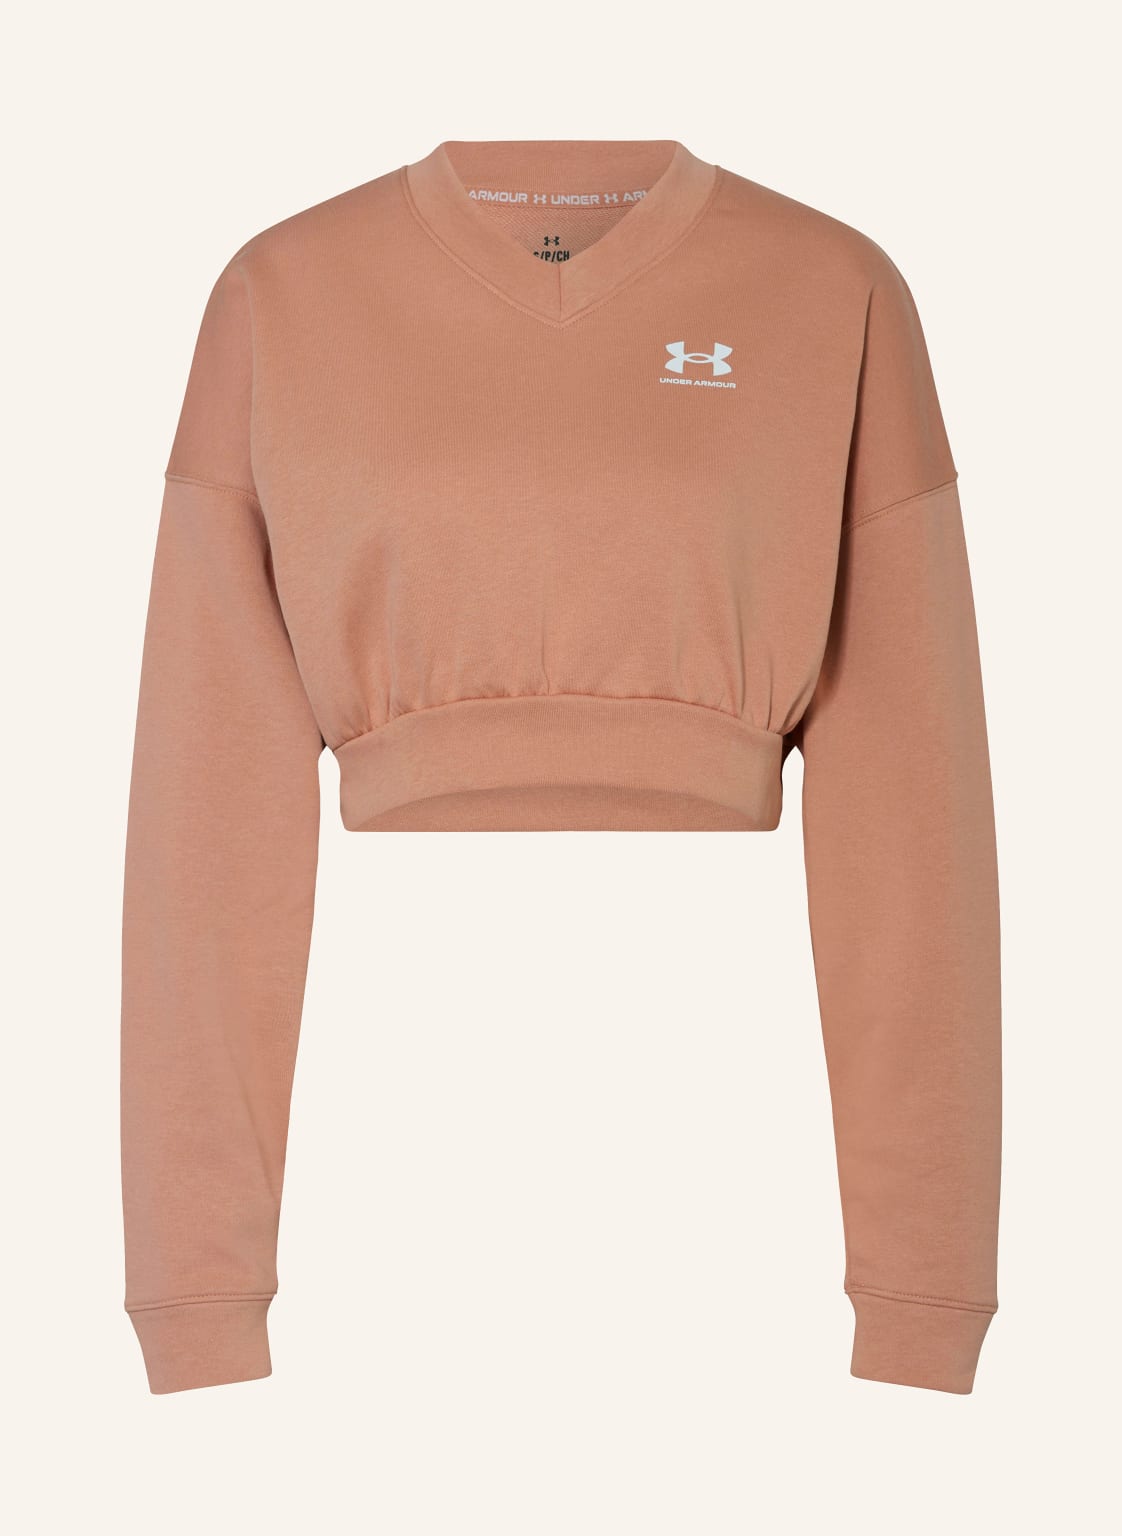 Under Armour Cropped-Sweatshirt Ua Rival Terry rosa von Under Armour